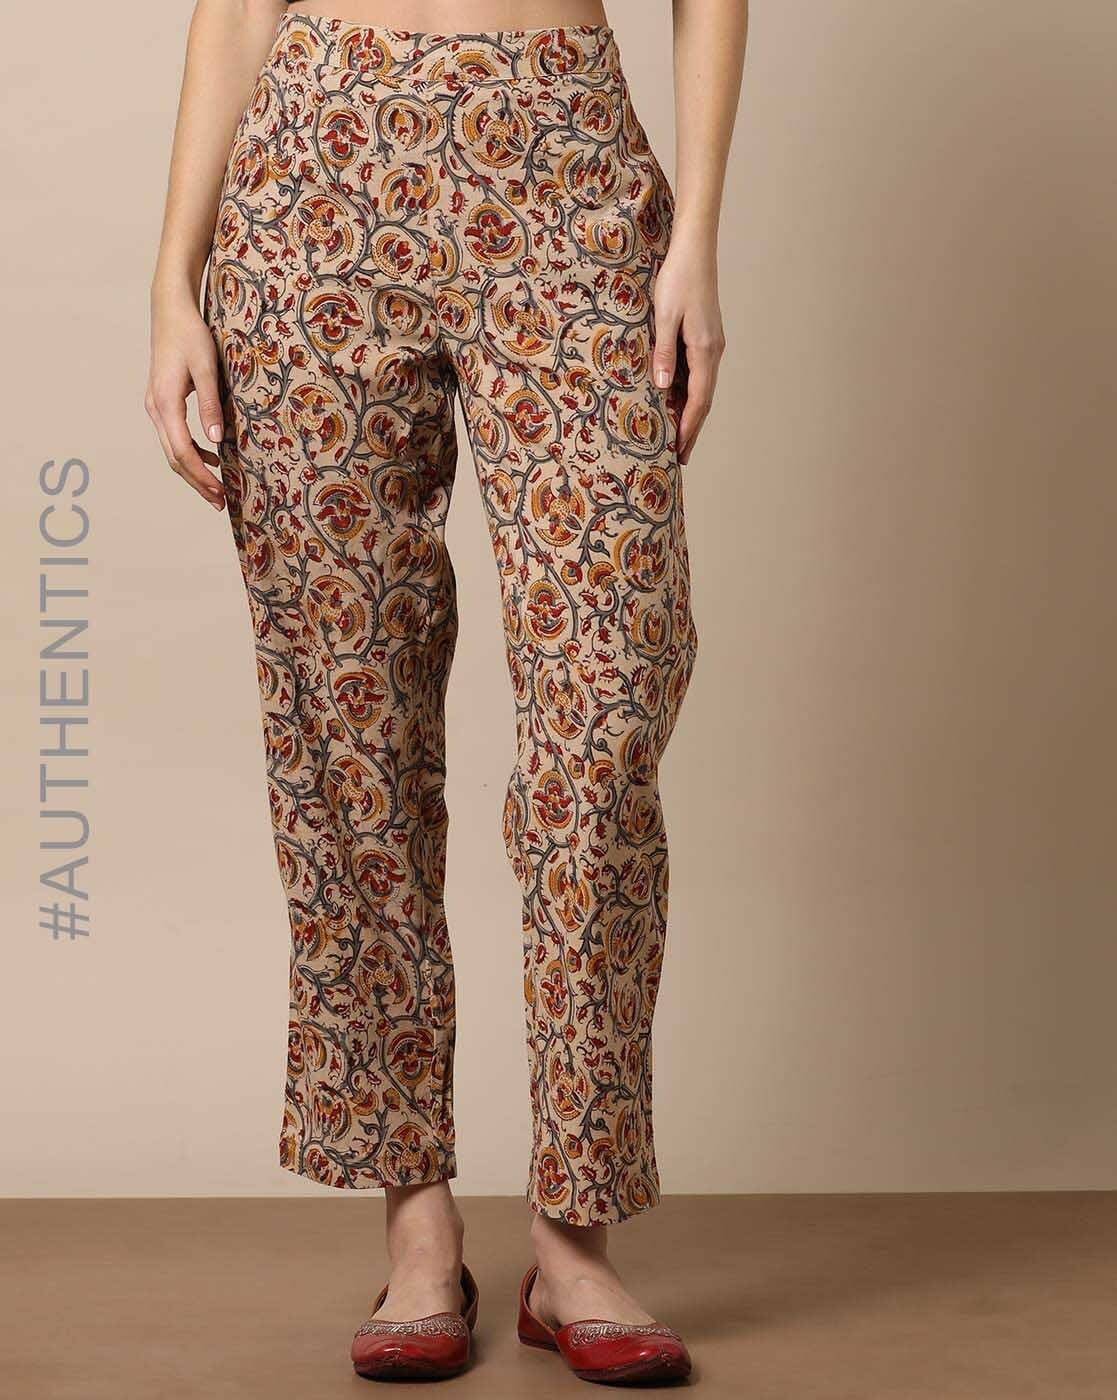 Buy Online Indigo Straight Rayon Pants for Women  Girls at Best Prices in  Biba IndiaWORKVOG17303AW